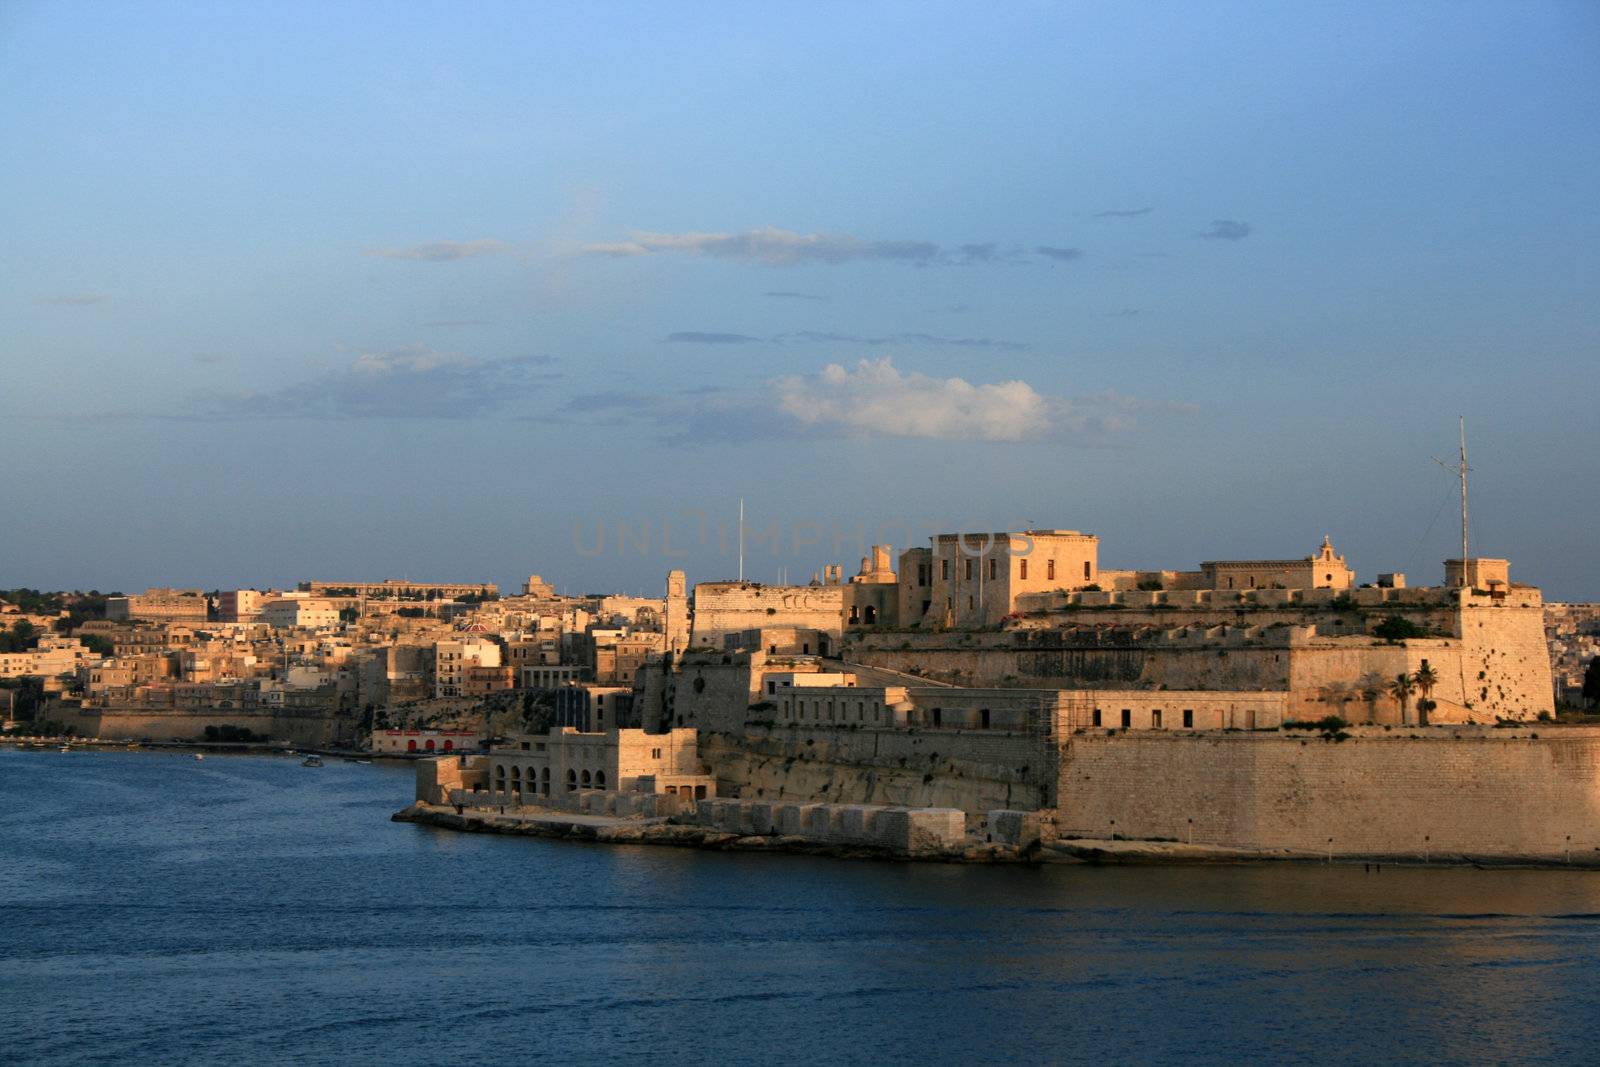 Malta Grand Harbor during the day